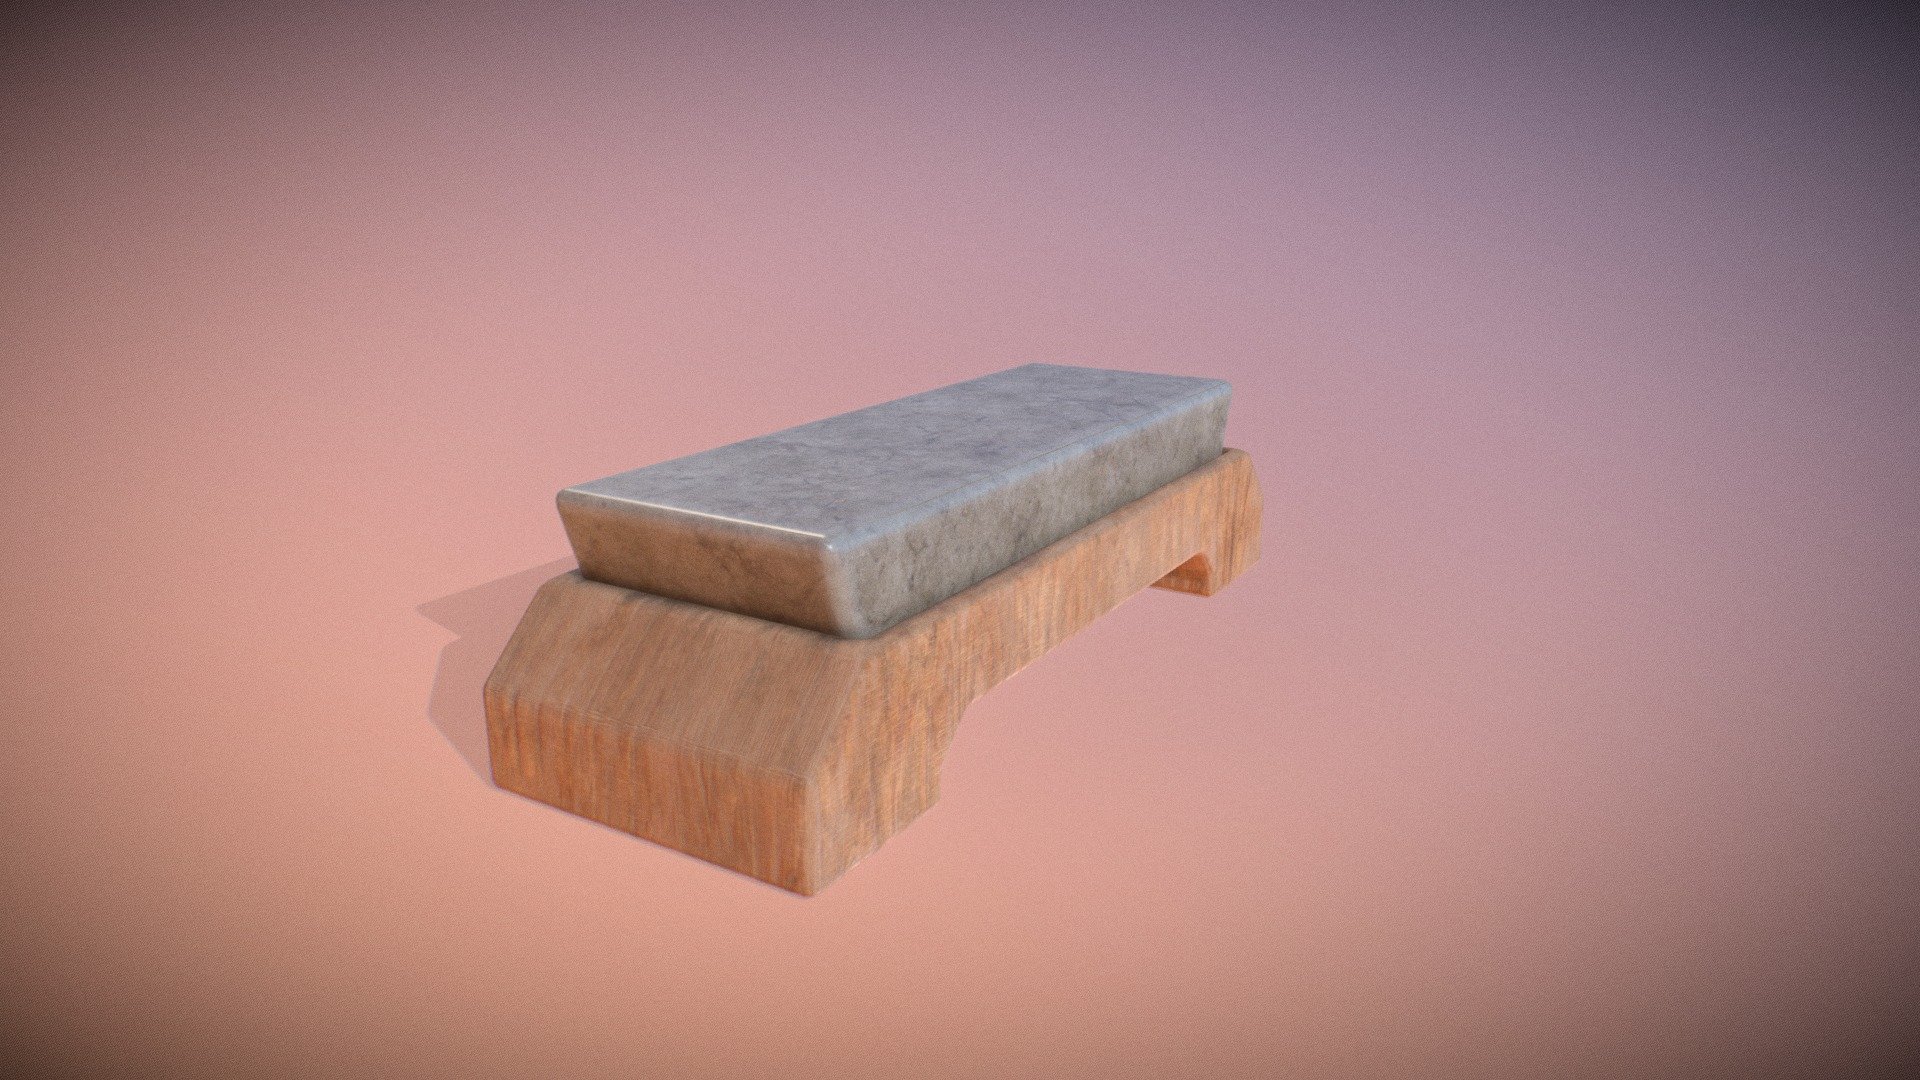 Sharpen your knife on this silly little item 3d model